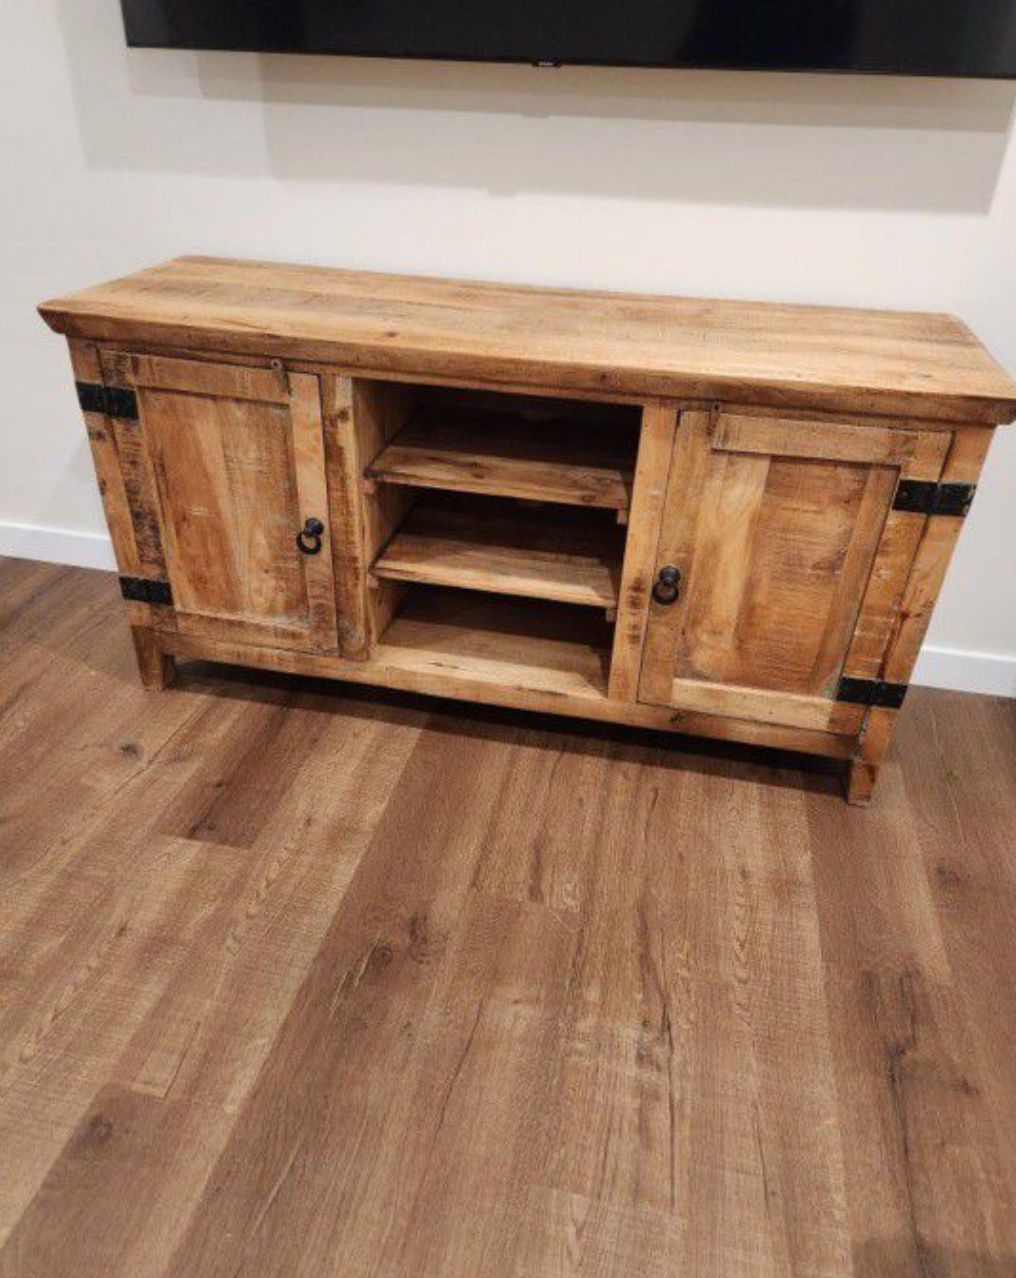 Wood TV Console Stand